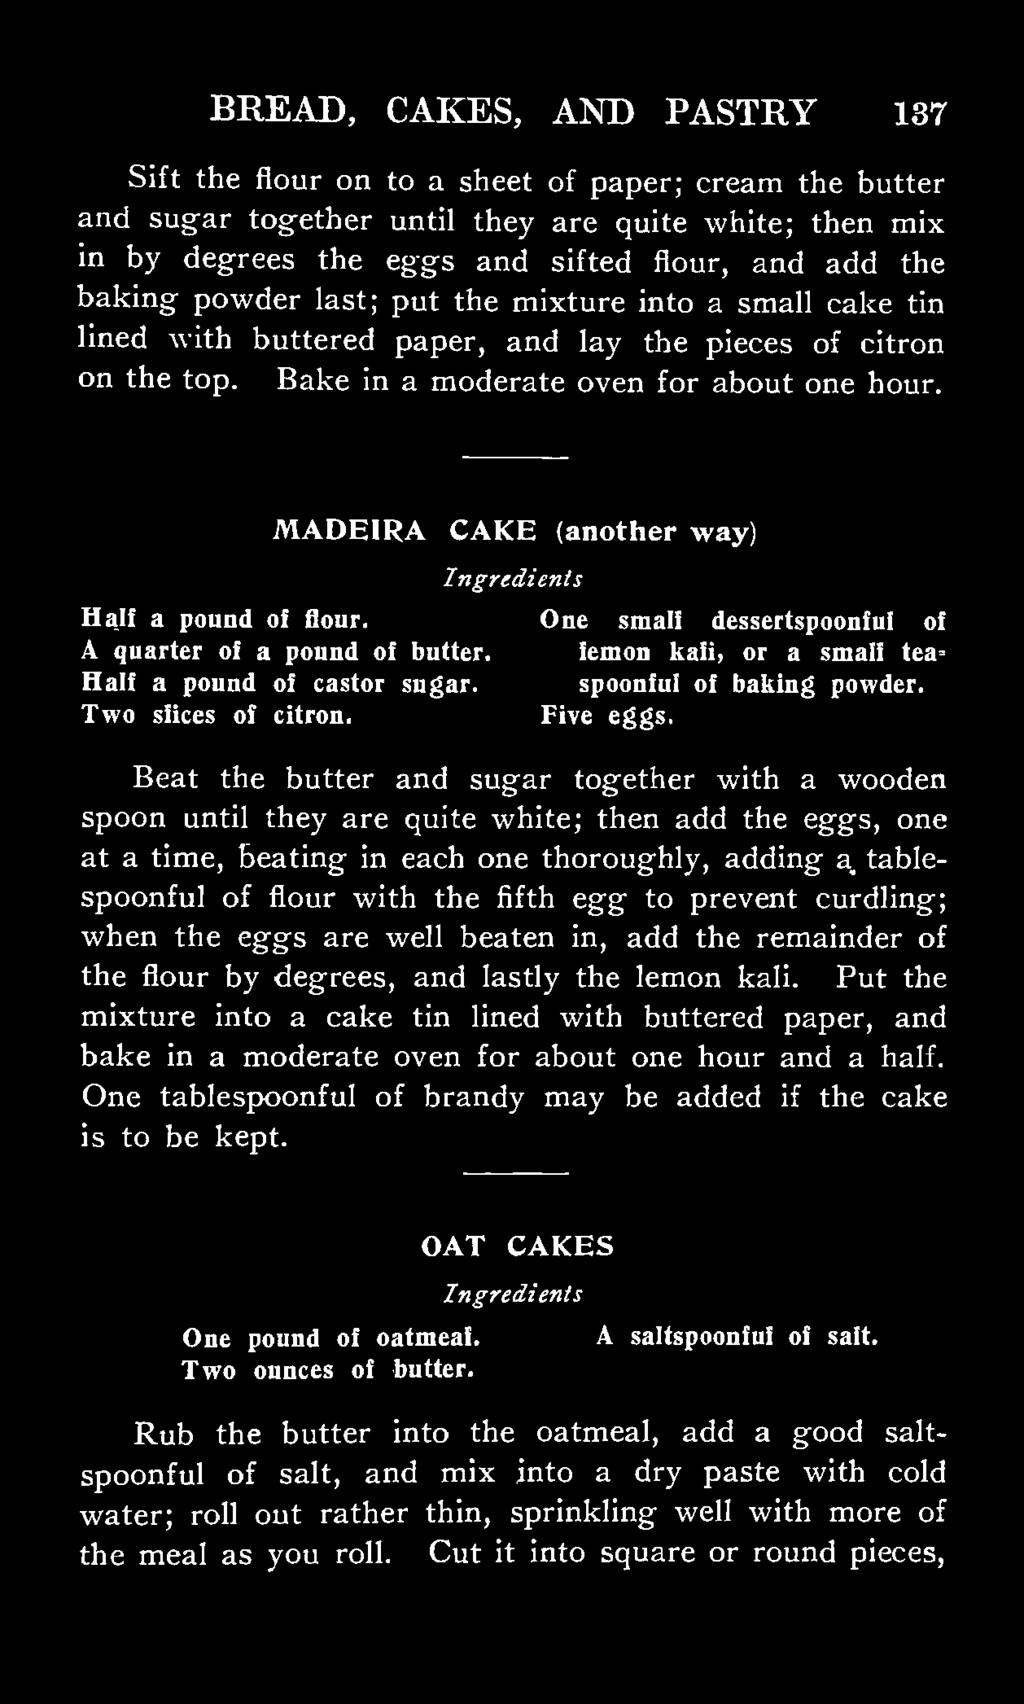 MADEIRA CAKE (another way) Half a pound of flour. One small dessertspoonful of A quarter of a pound of butter. lemon kali, or a small tea* Half a pound of castor sugar. spoonful of baking powder.